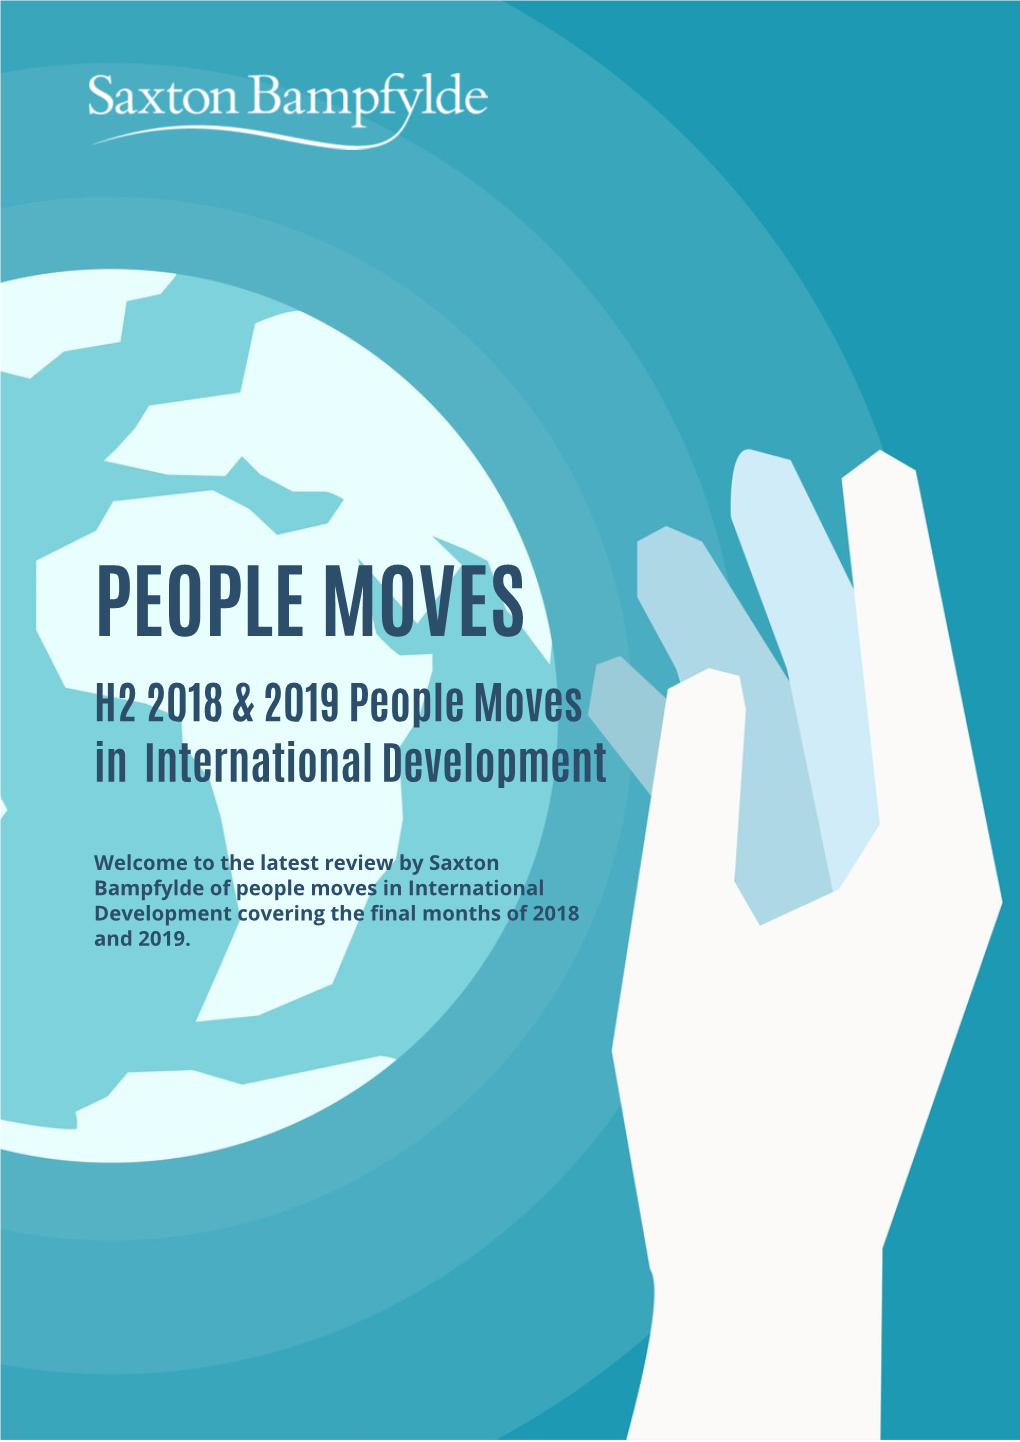 PEOPLE MOVES H2 2018 & 2019 People Moves in International Development